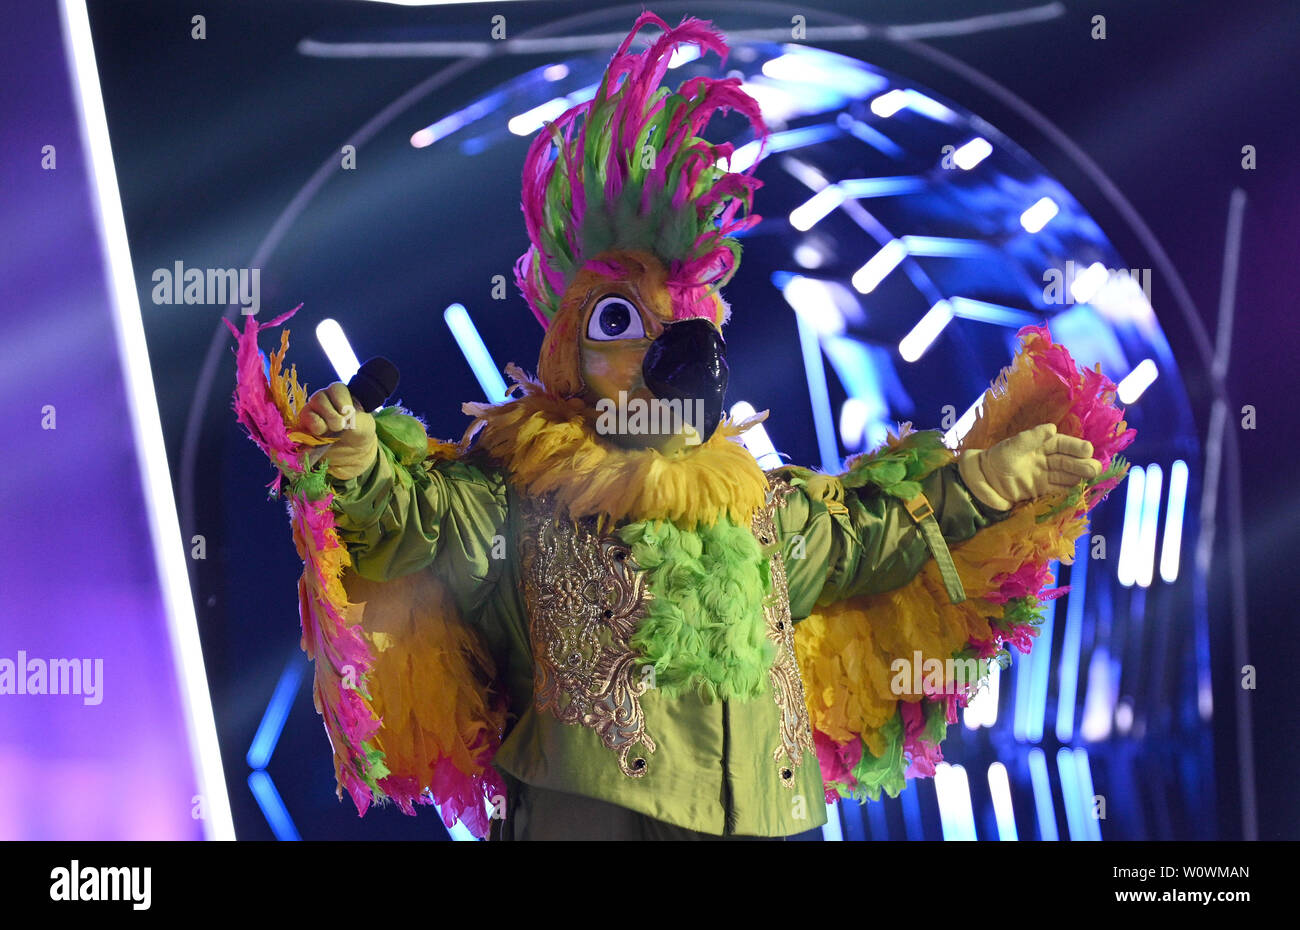 Cologne, Germany. 27th June, 2019. The "Kakadu", a masked participant of  the new ProSieben show "The Masked Singer", is on stage. Credit: Henning  Kaiser/dpa/Alamy Live News Stock Photo - Alamy